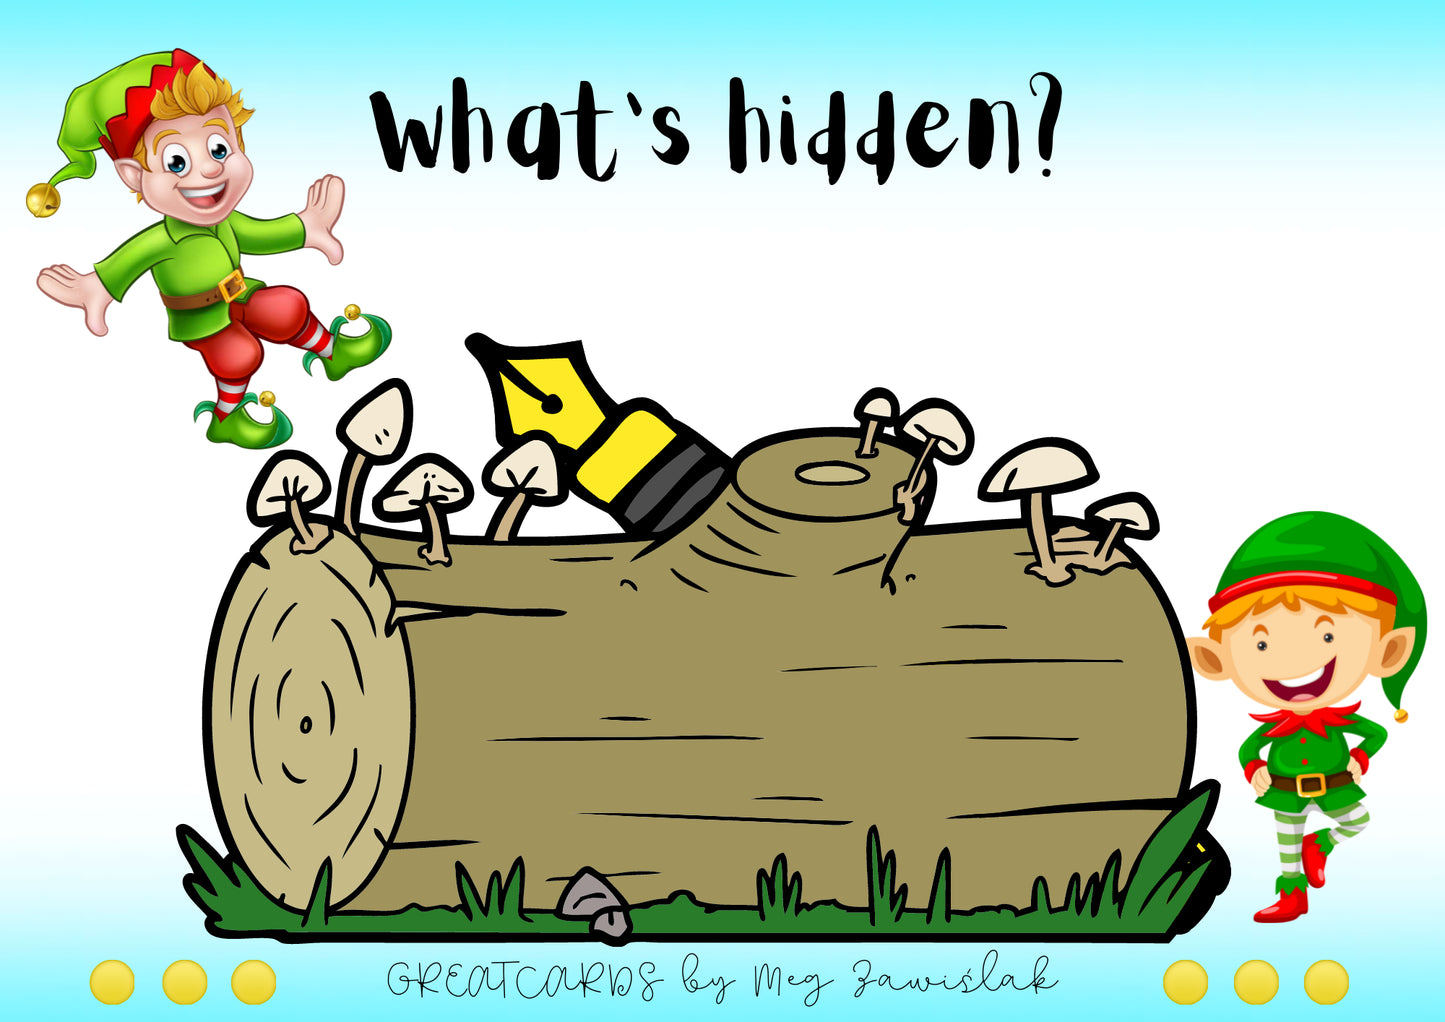 Greatcards - What's hidden? - school things and toys